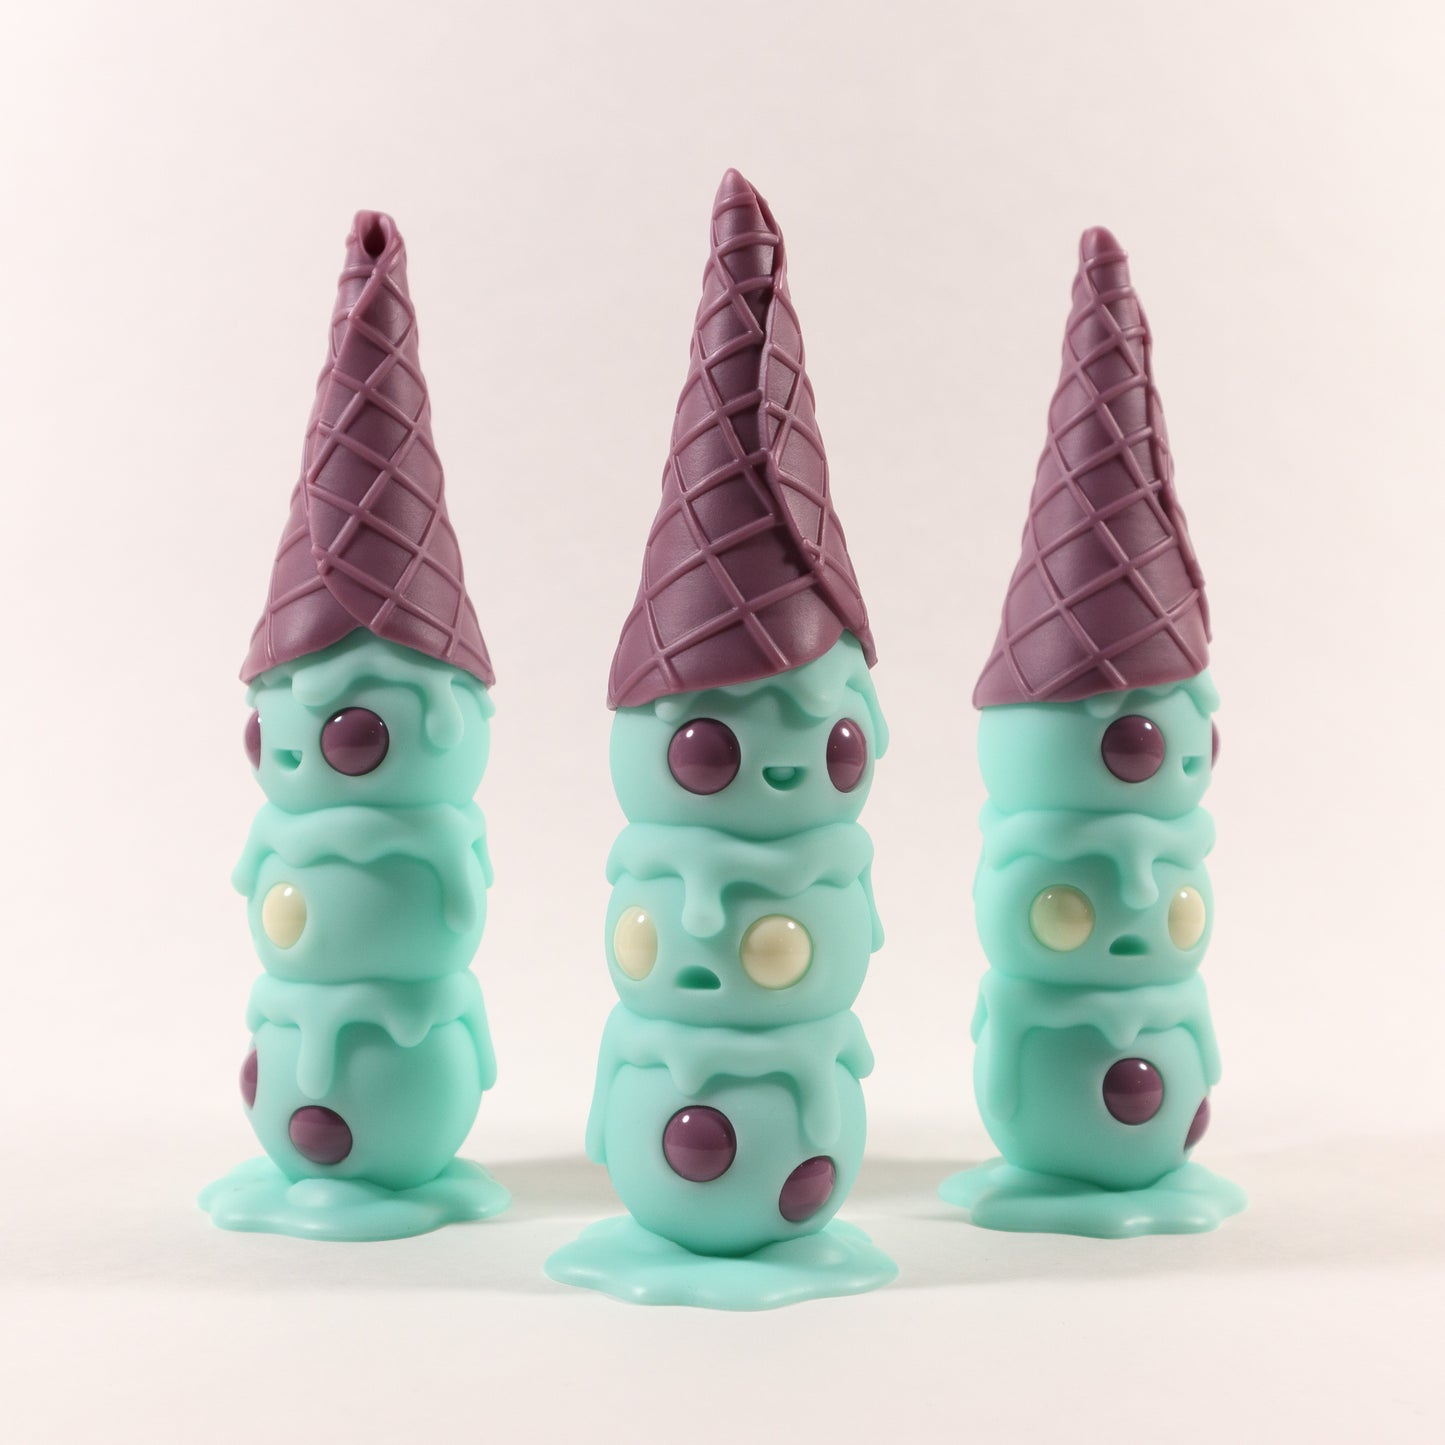 This is Wafull Ice Cream Social Limited Edition Resin Figure (LCC Exclusive)